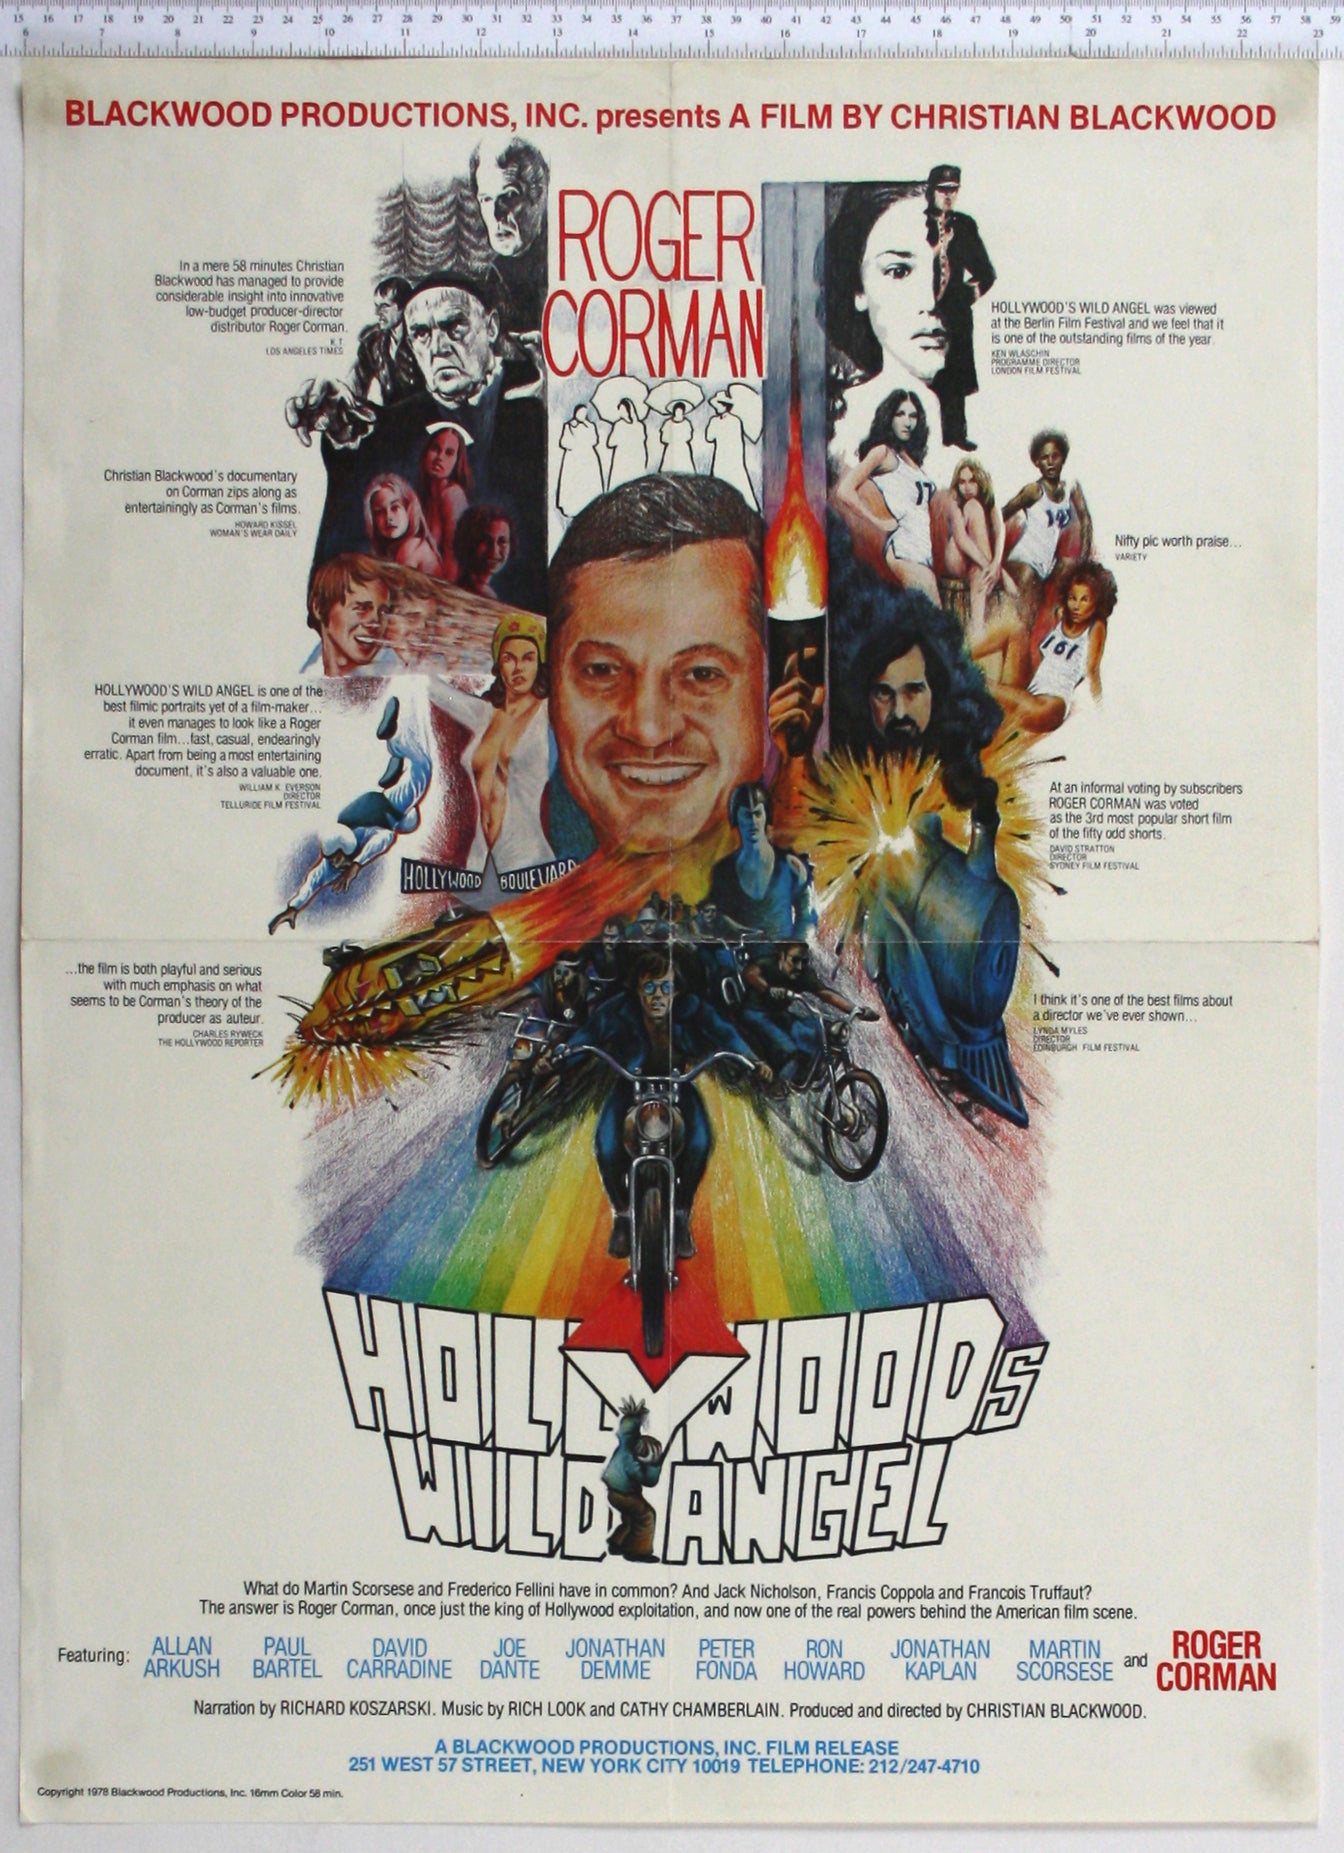 Artwork of Corman's face, surrounded by colour and b+w images of key films and people, advancing motorbikes at bottom.